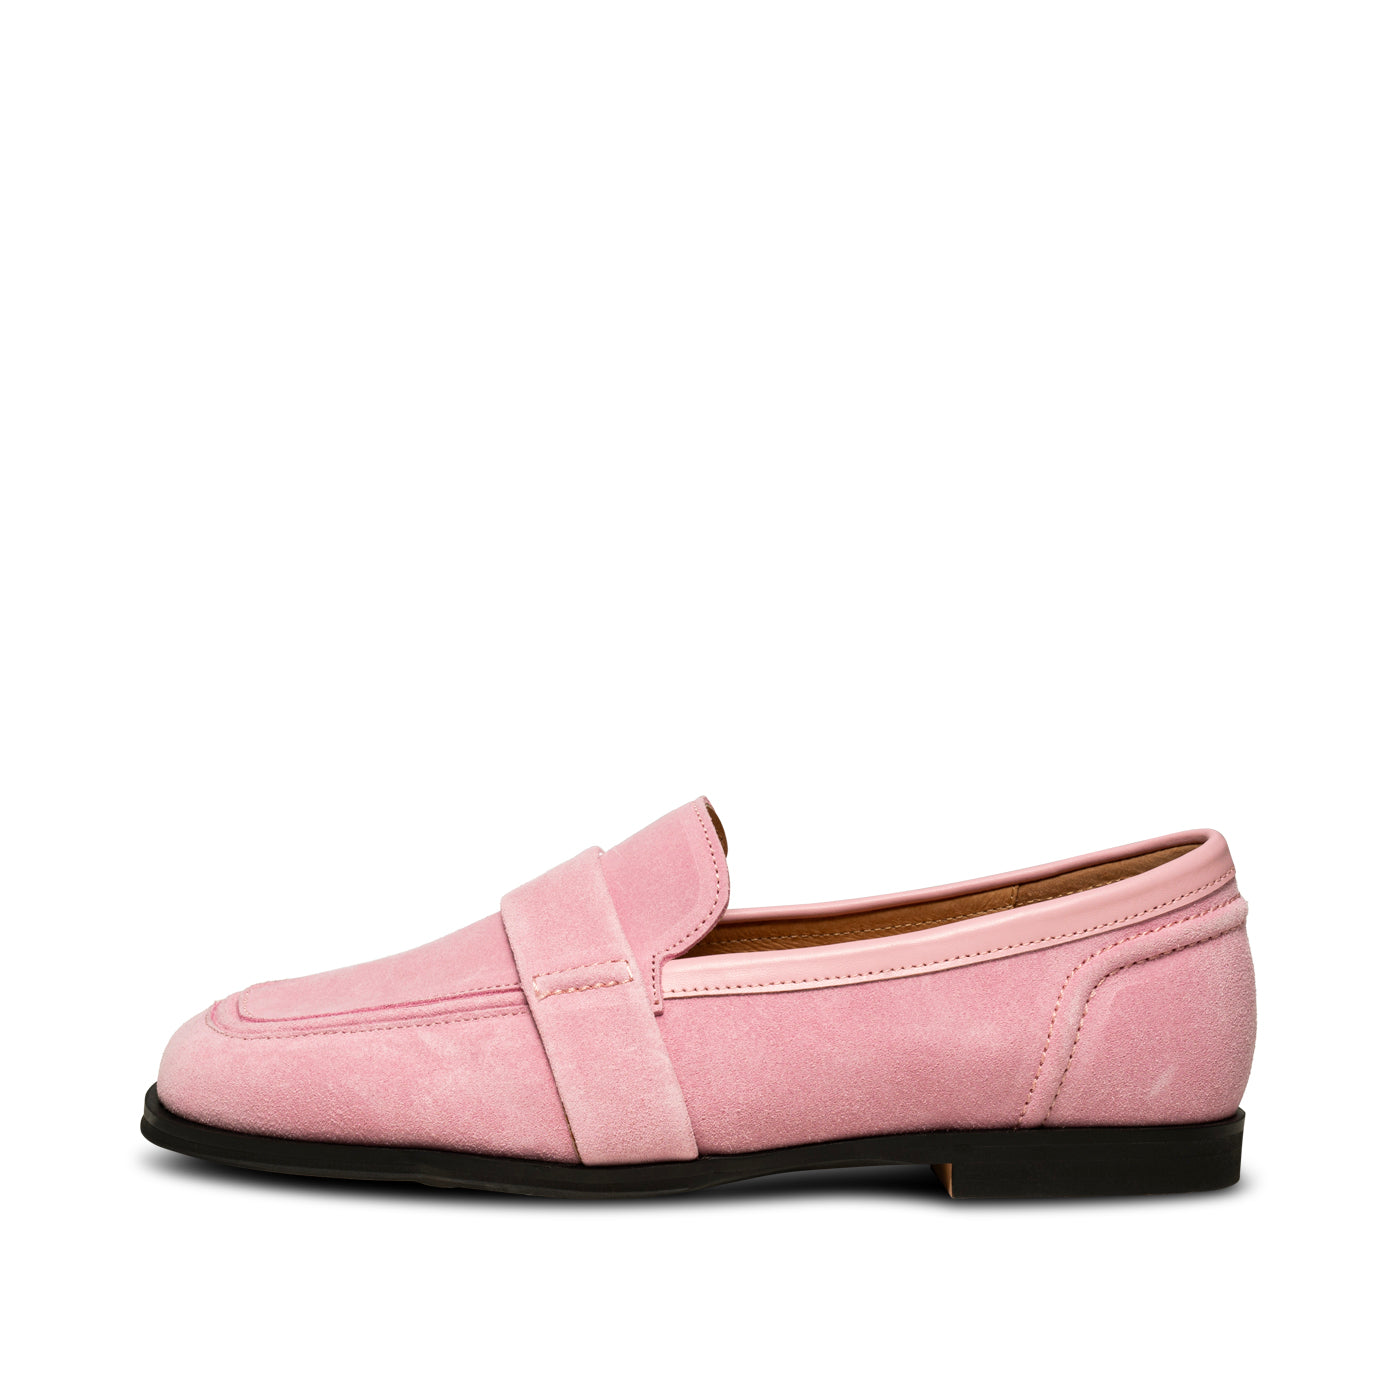 SHOE THE BEAR WOMENS Erika saddle loafer ruskind Loafers 761 Soft Pink